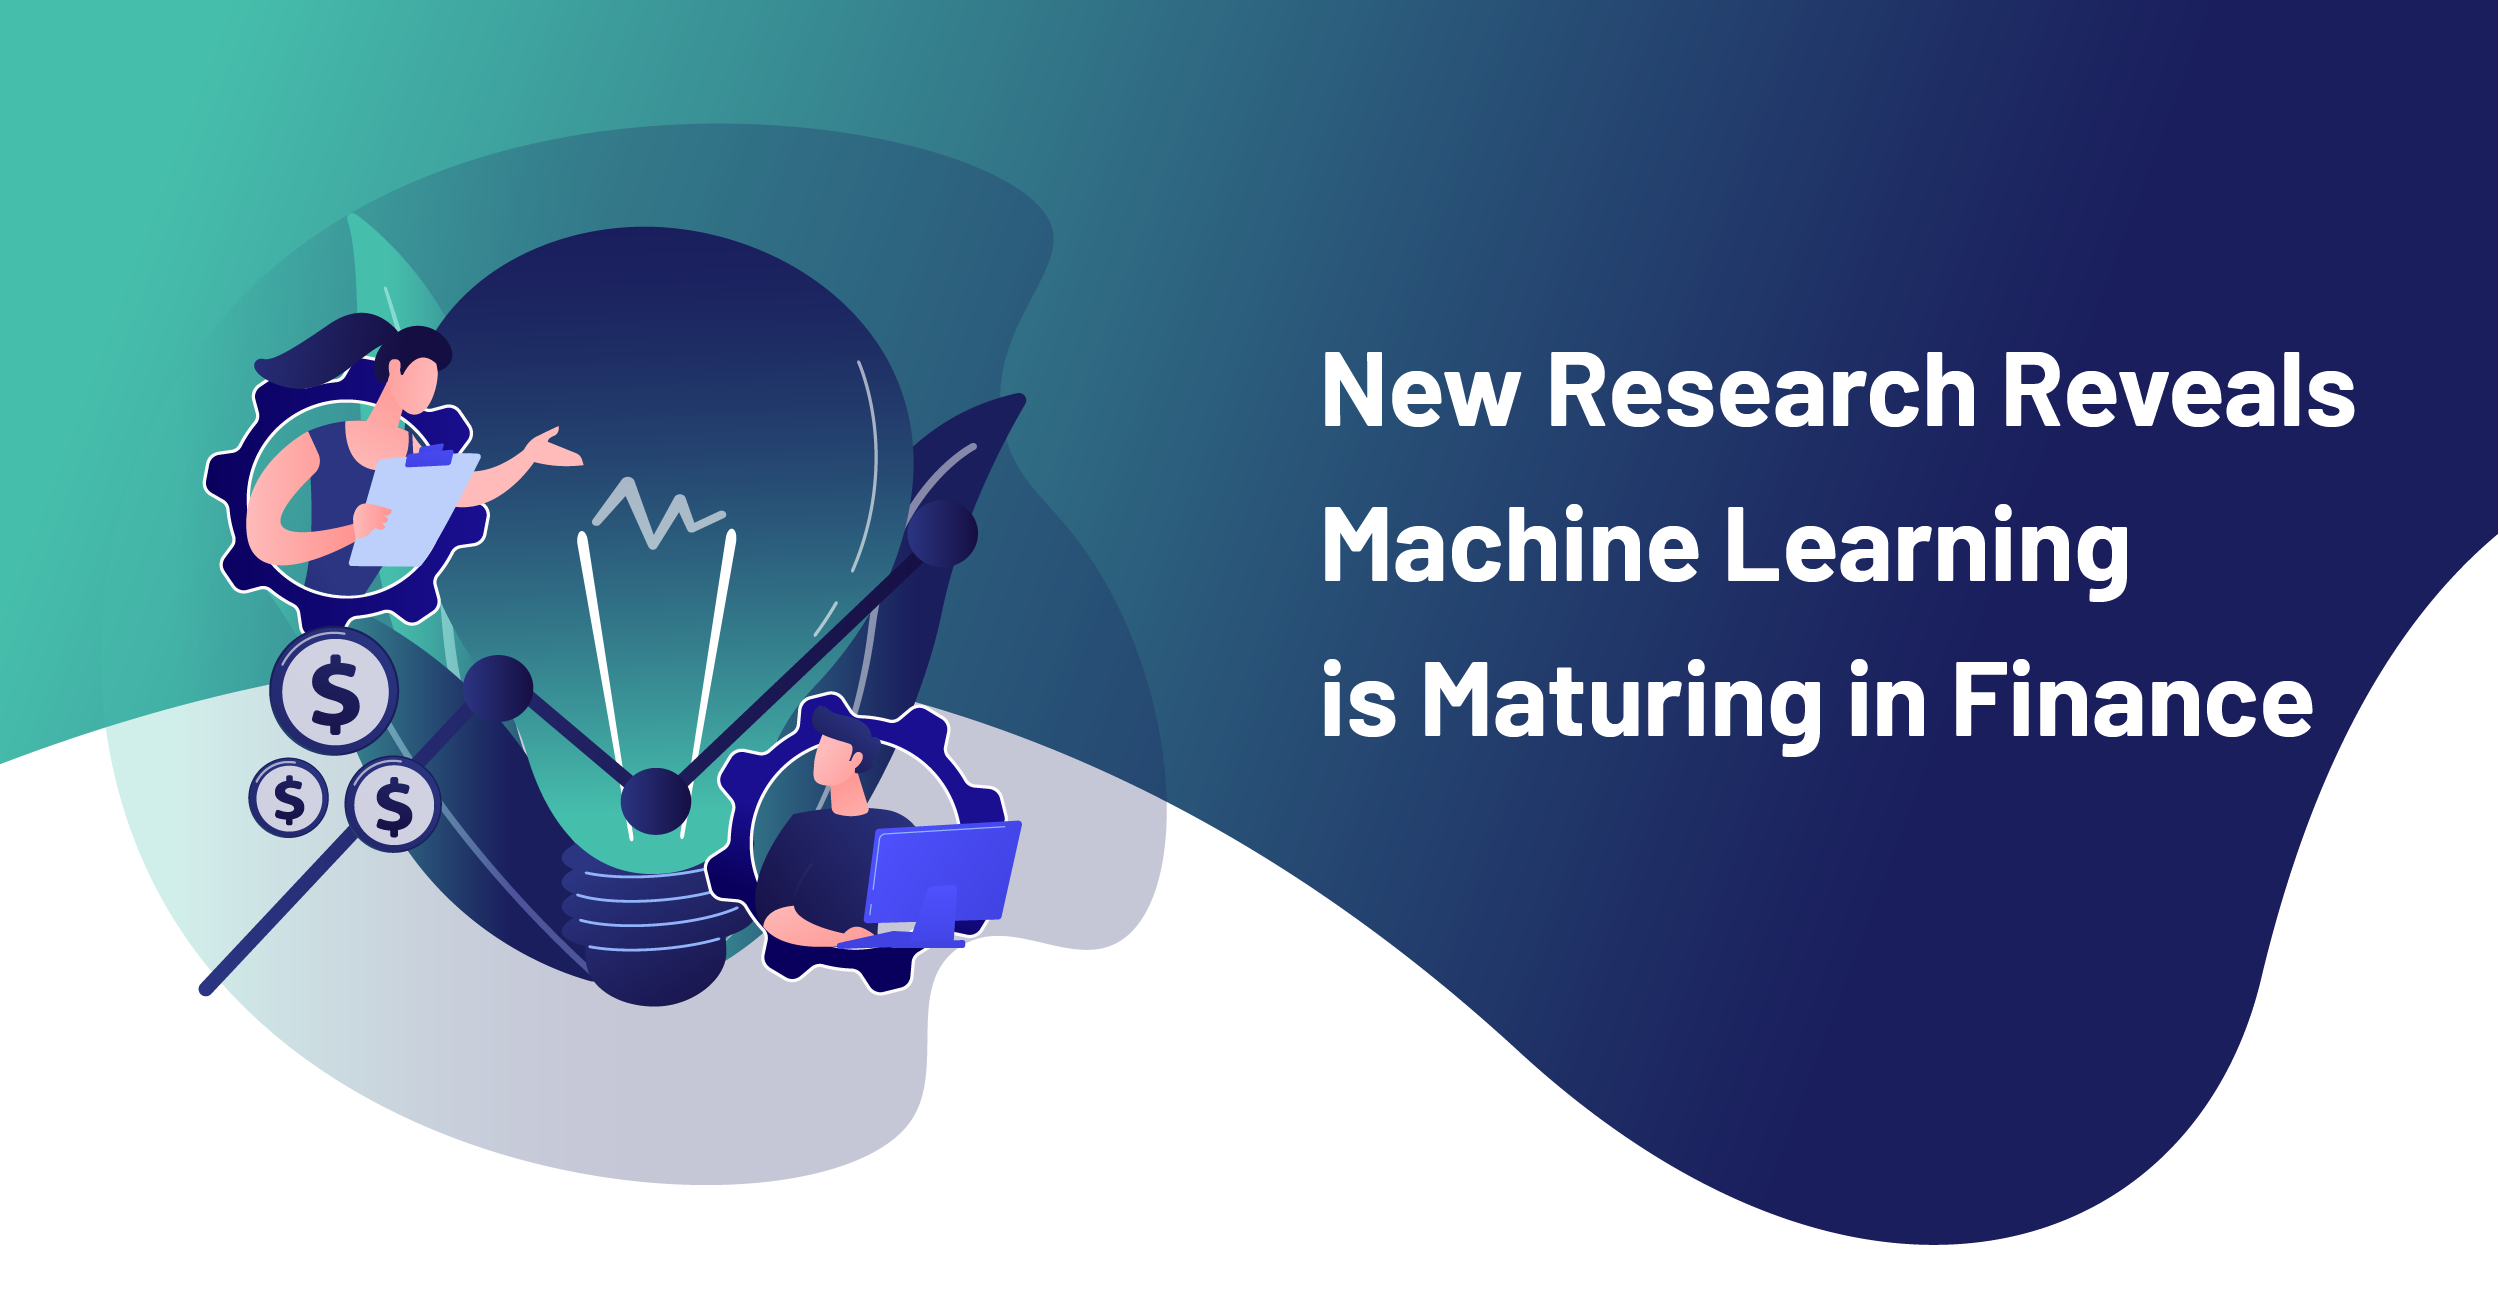 New Research reveals machine learning is maturing in finance